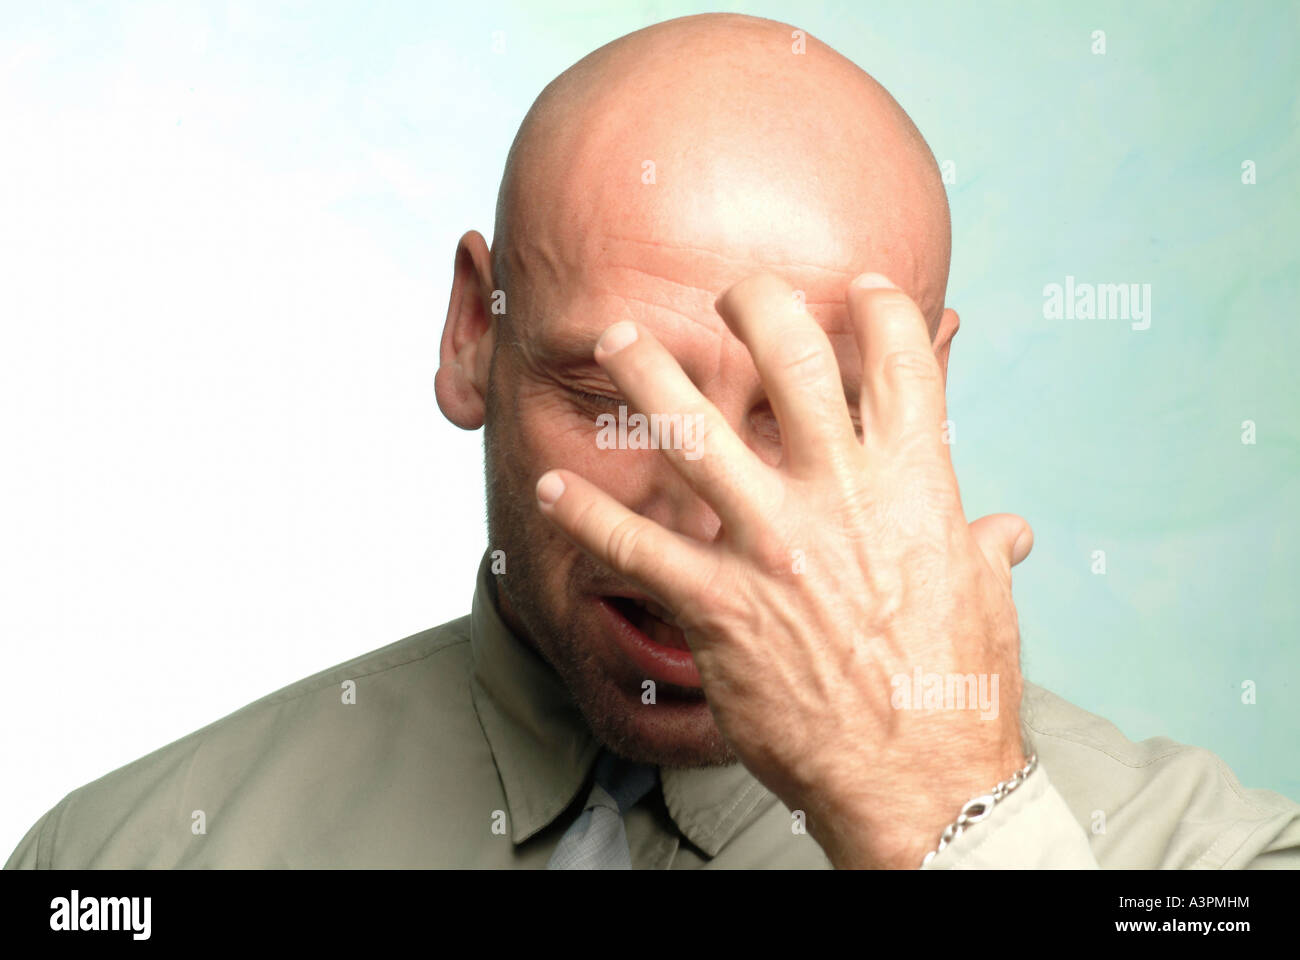 Man with a dismayed look on his face Stock Photo